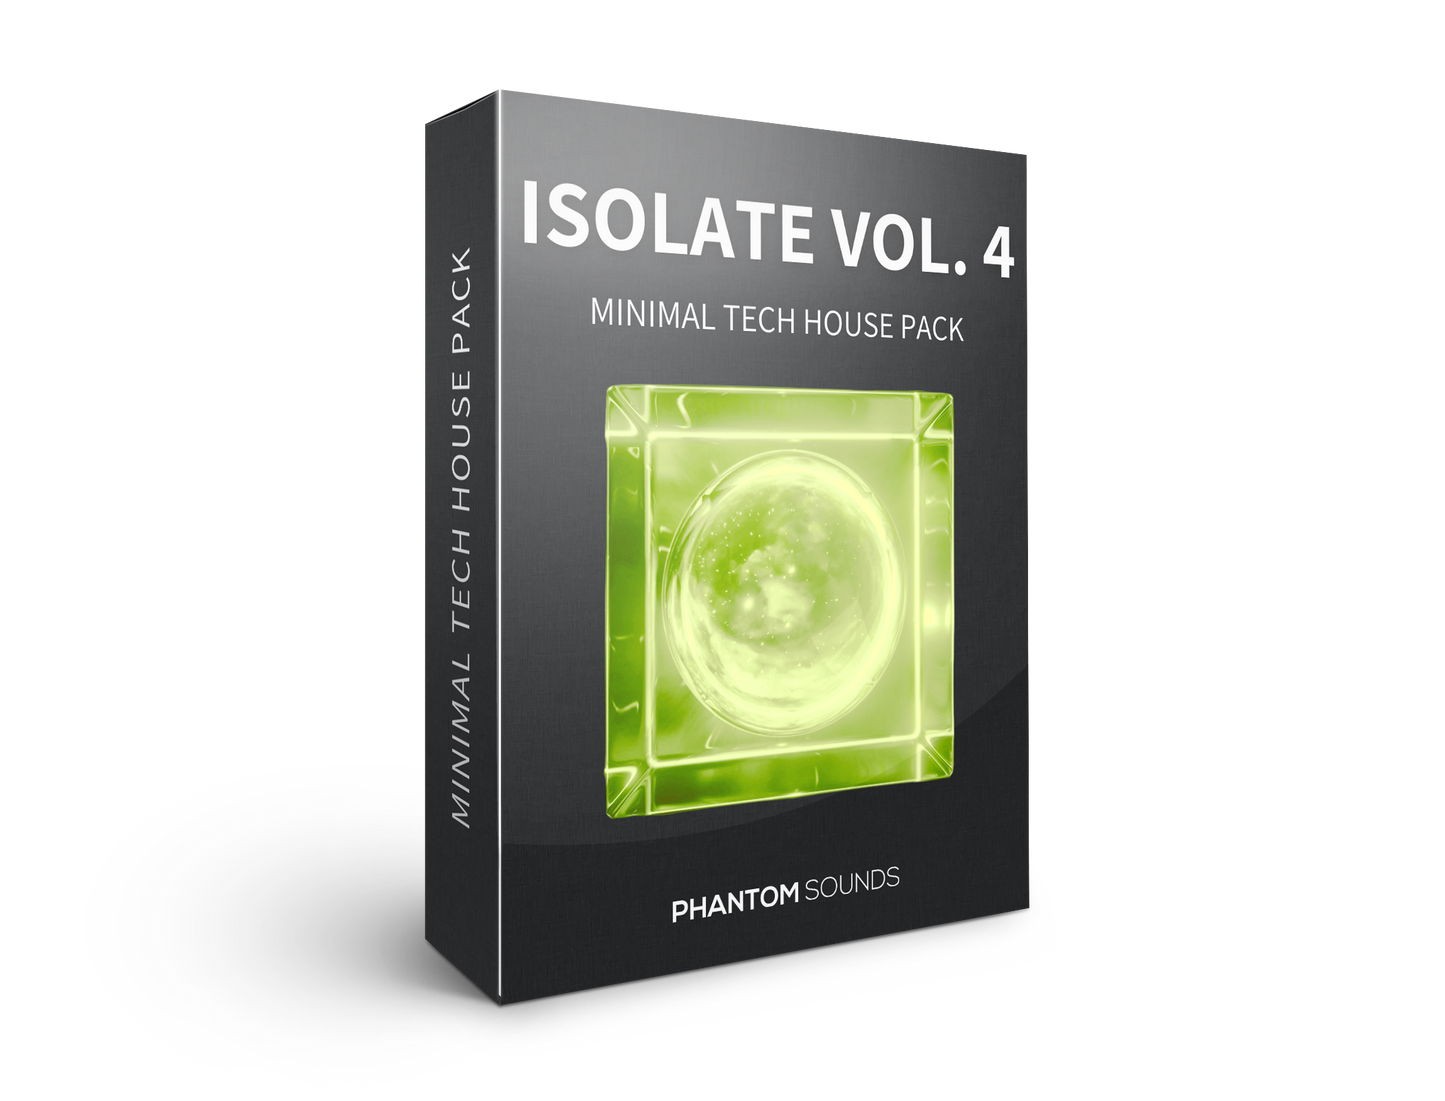 Isolate Vol. 4 - Minimal Tech House Pack